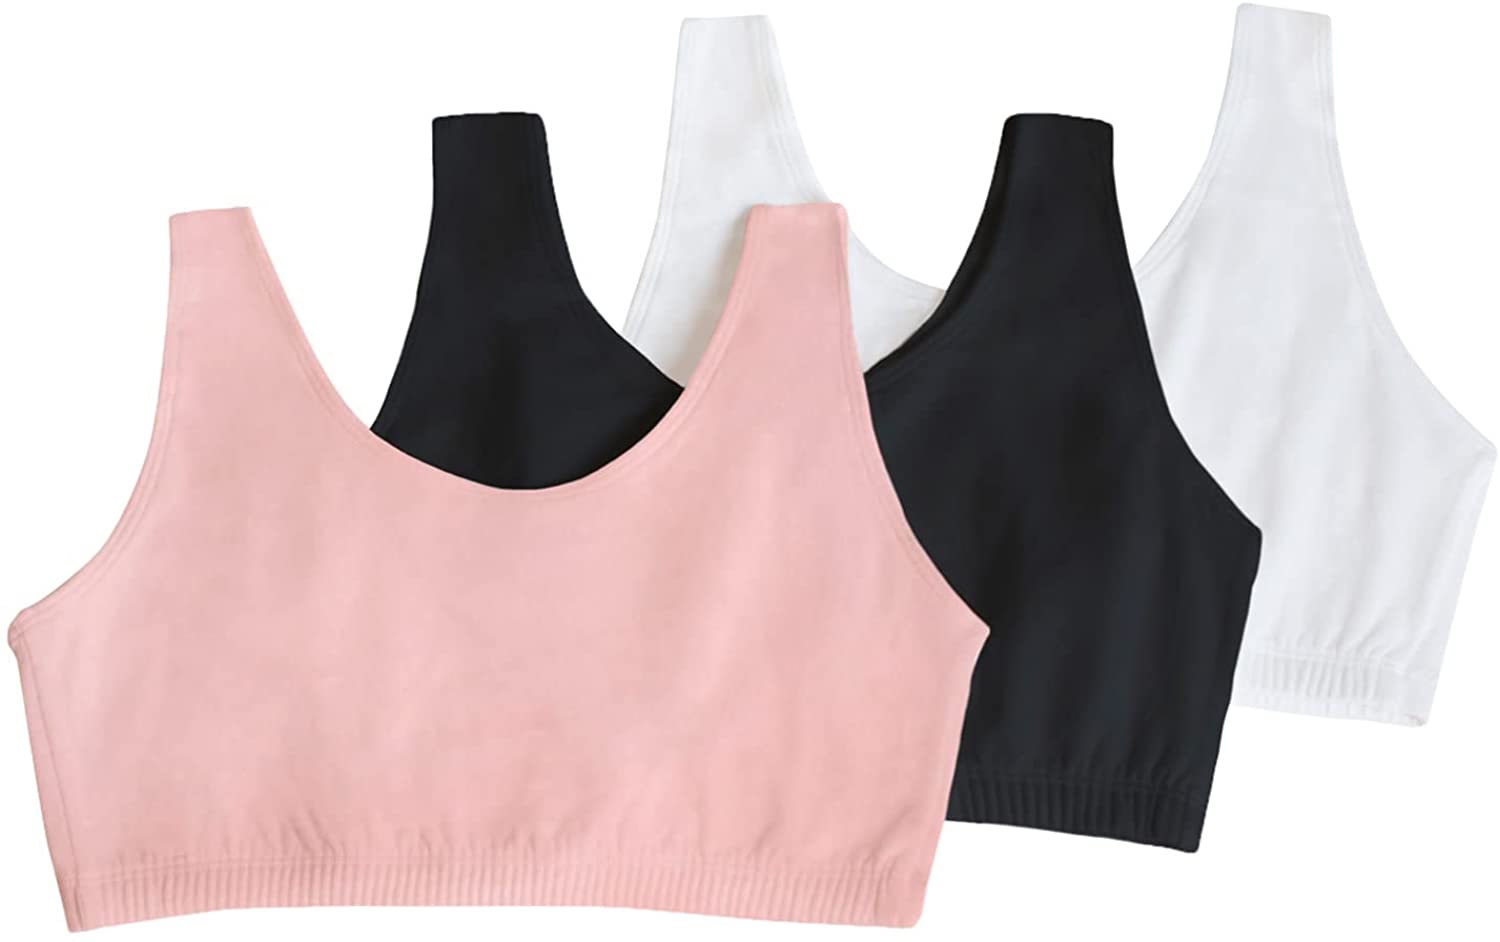 Fruit of the Loom Women's Built Up Tank Style Sports Bra Value